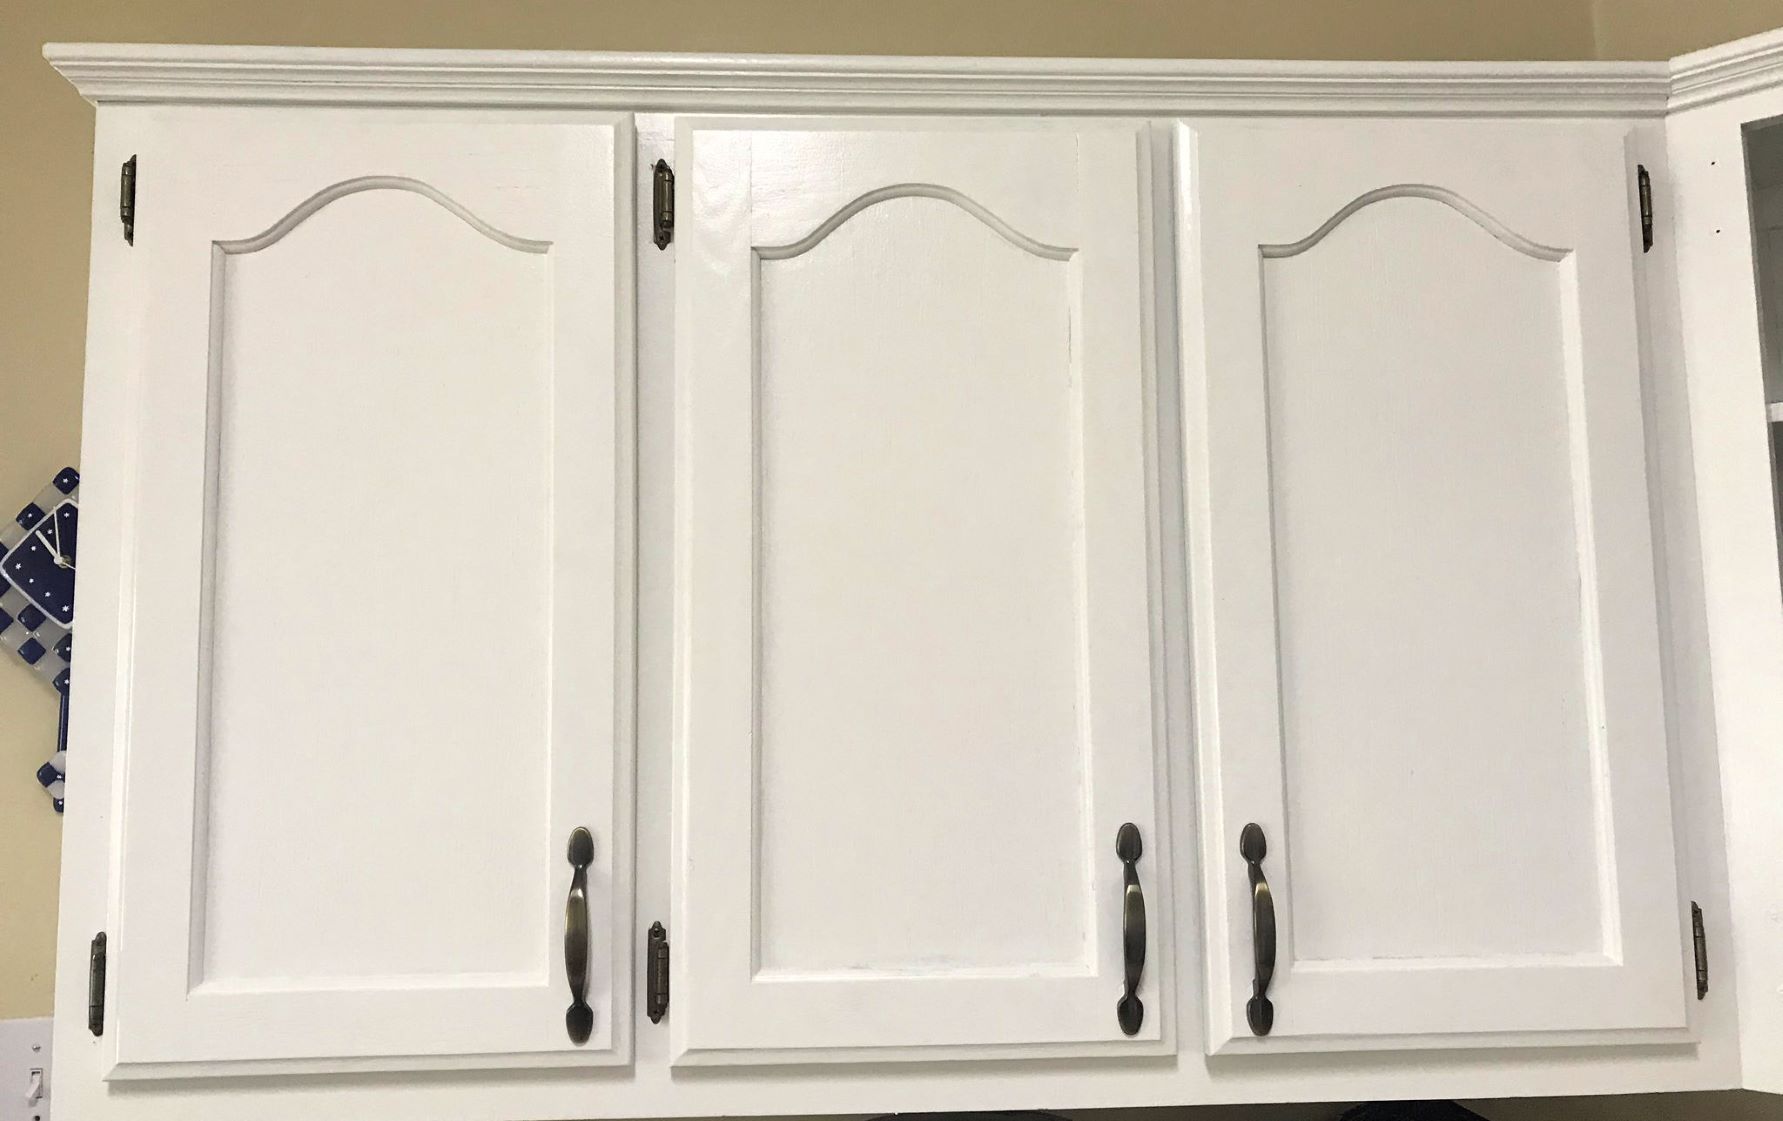 how to paint kitchen cabinets white